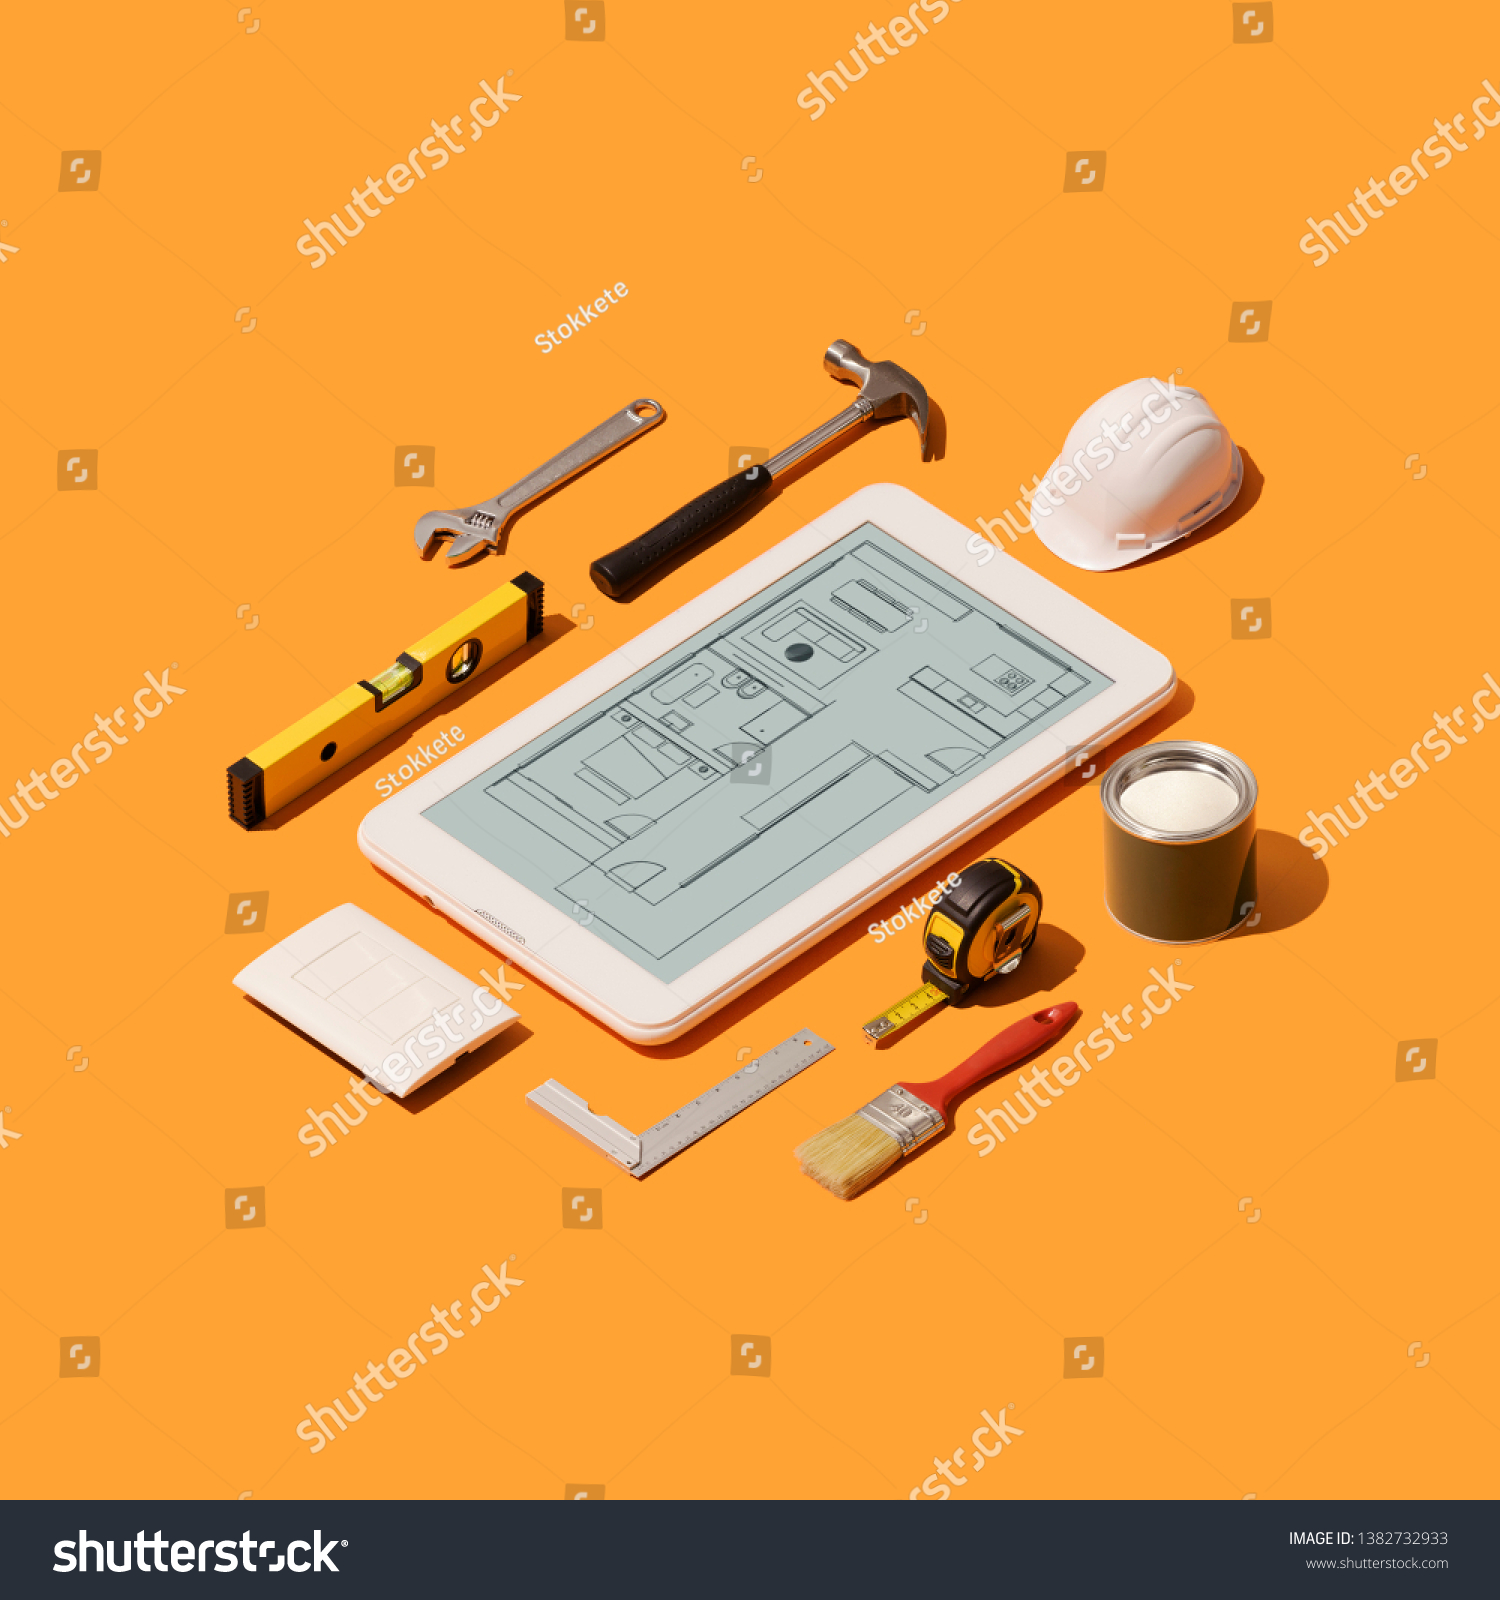 Home renovation and project design app on a touch screen tablet and isometric DIY construction tools on a smartphone #1382732933